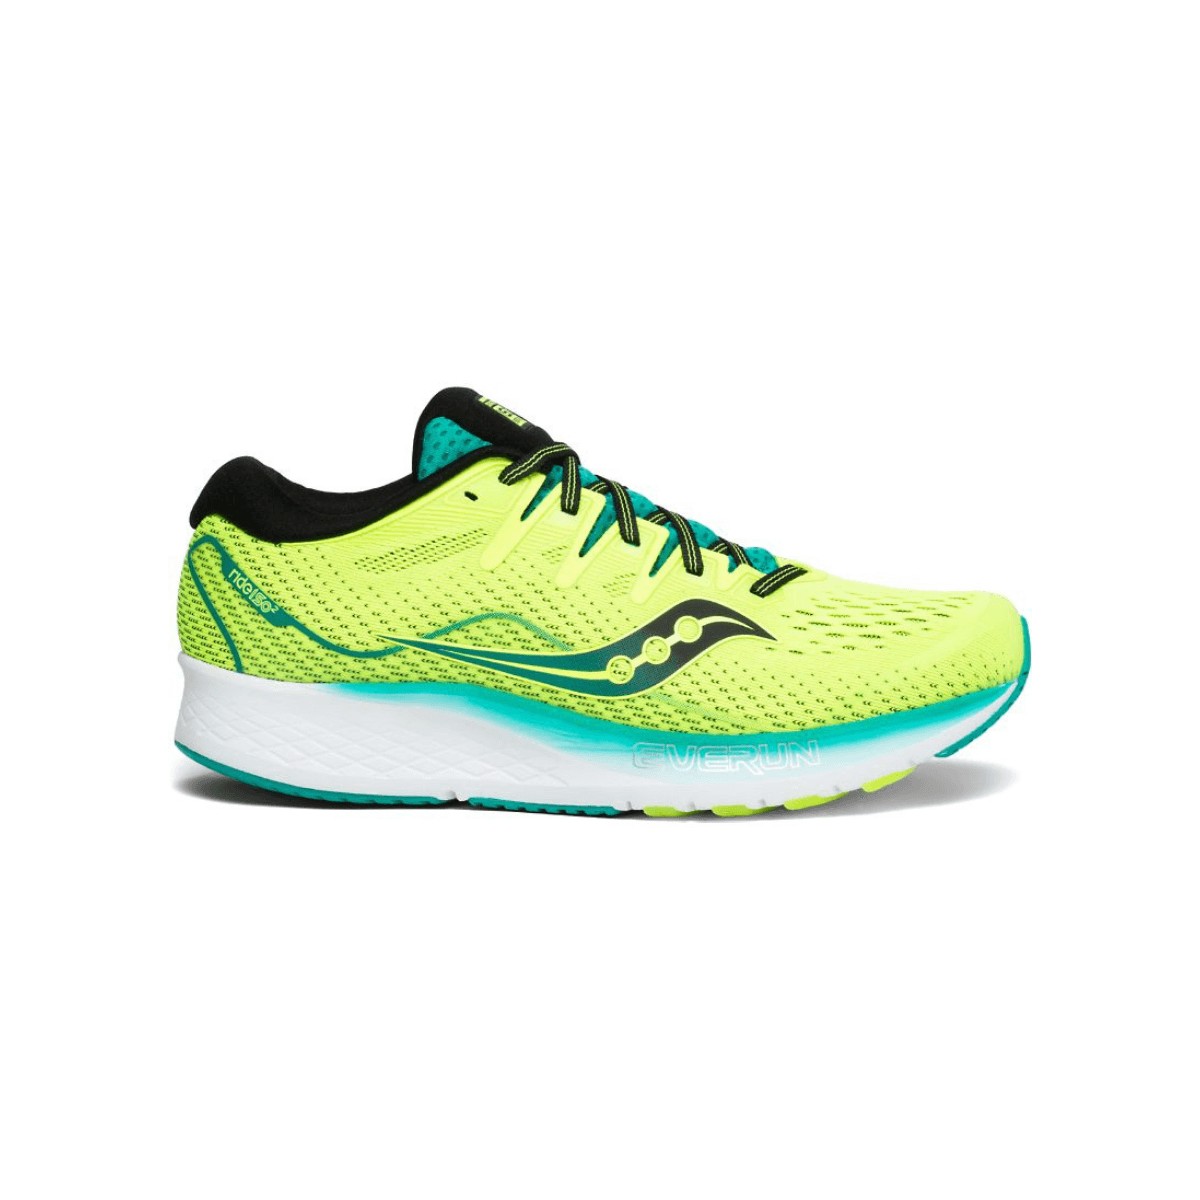 green and yellow running shoes